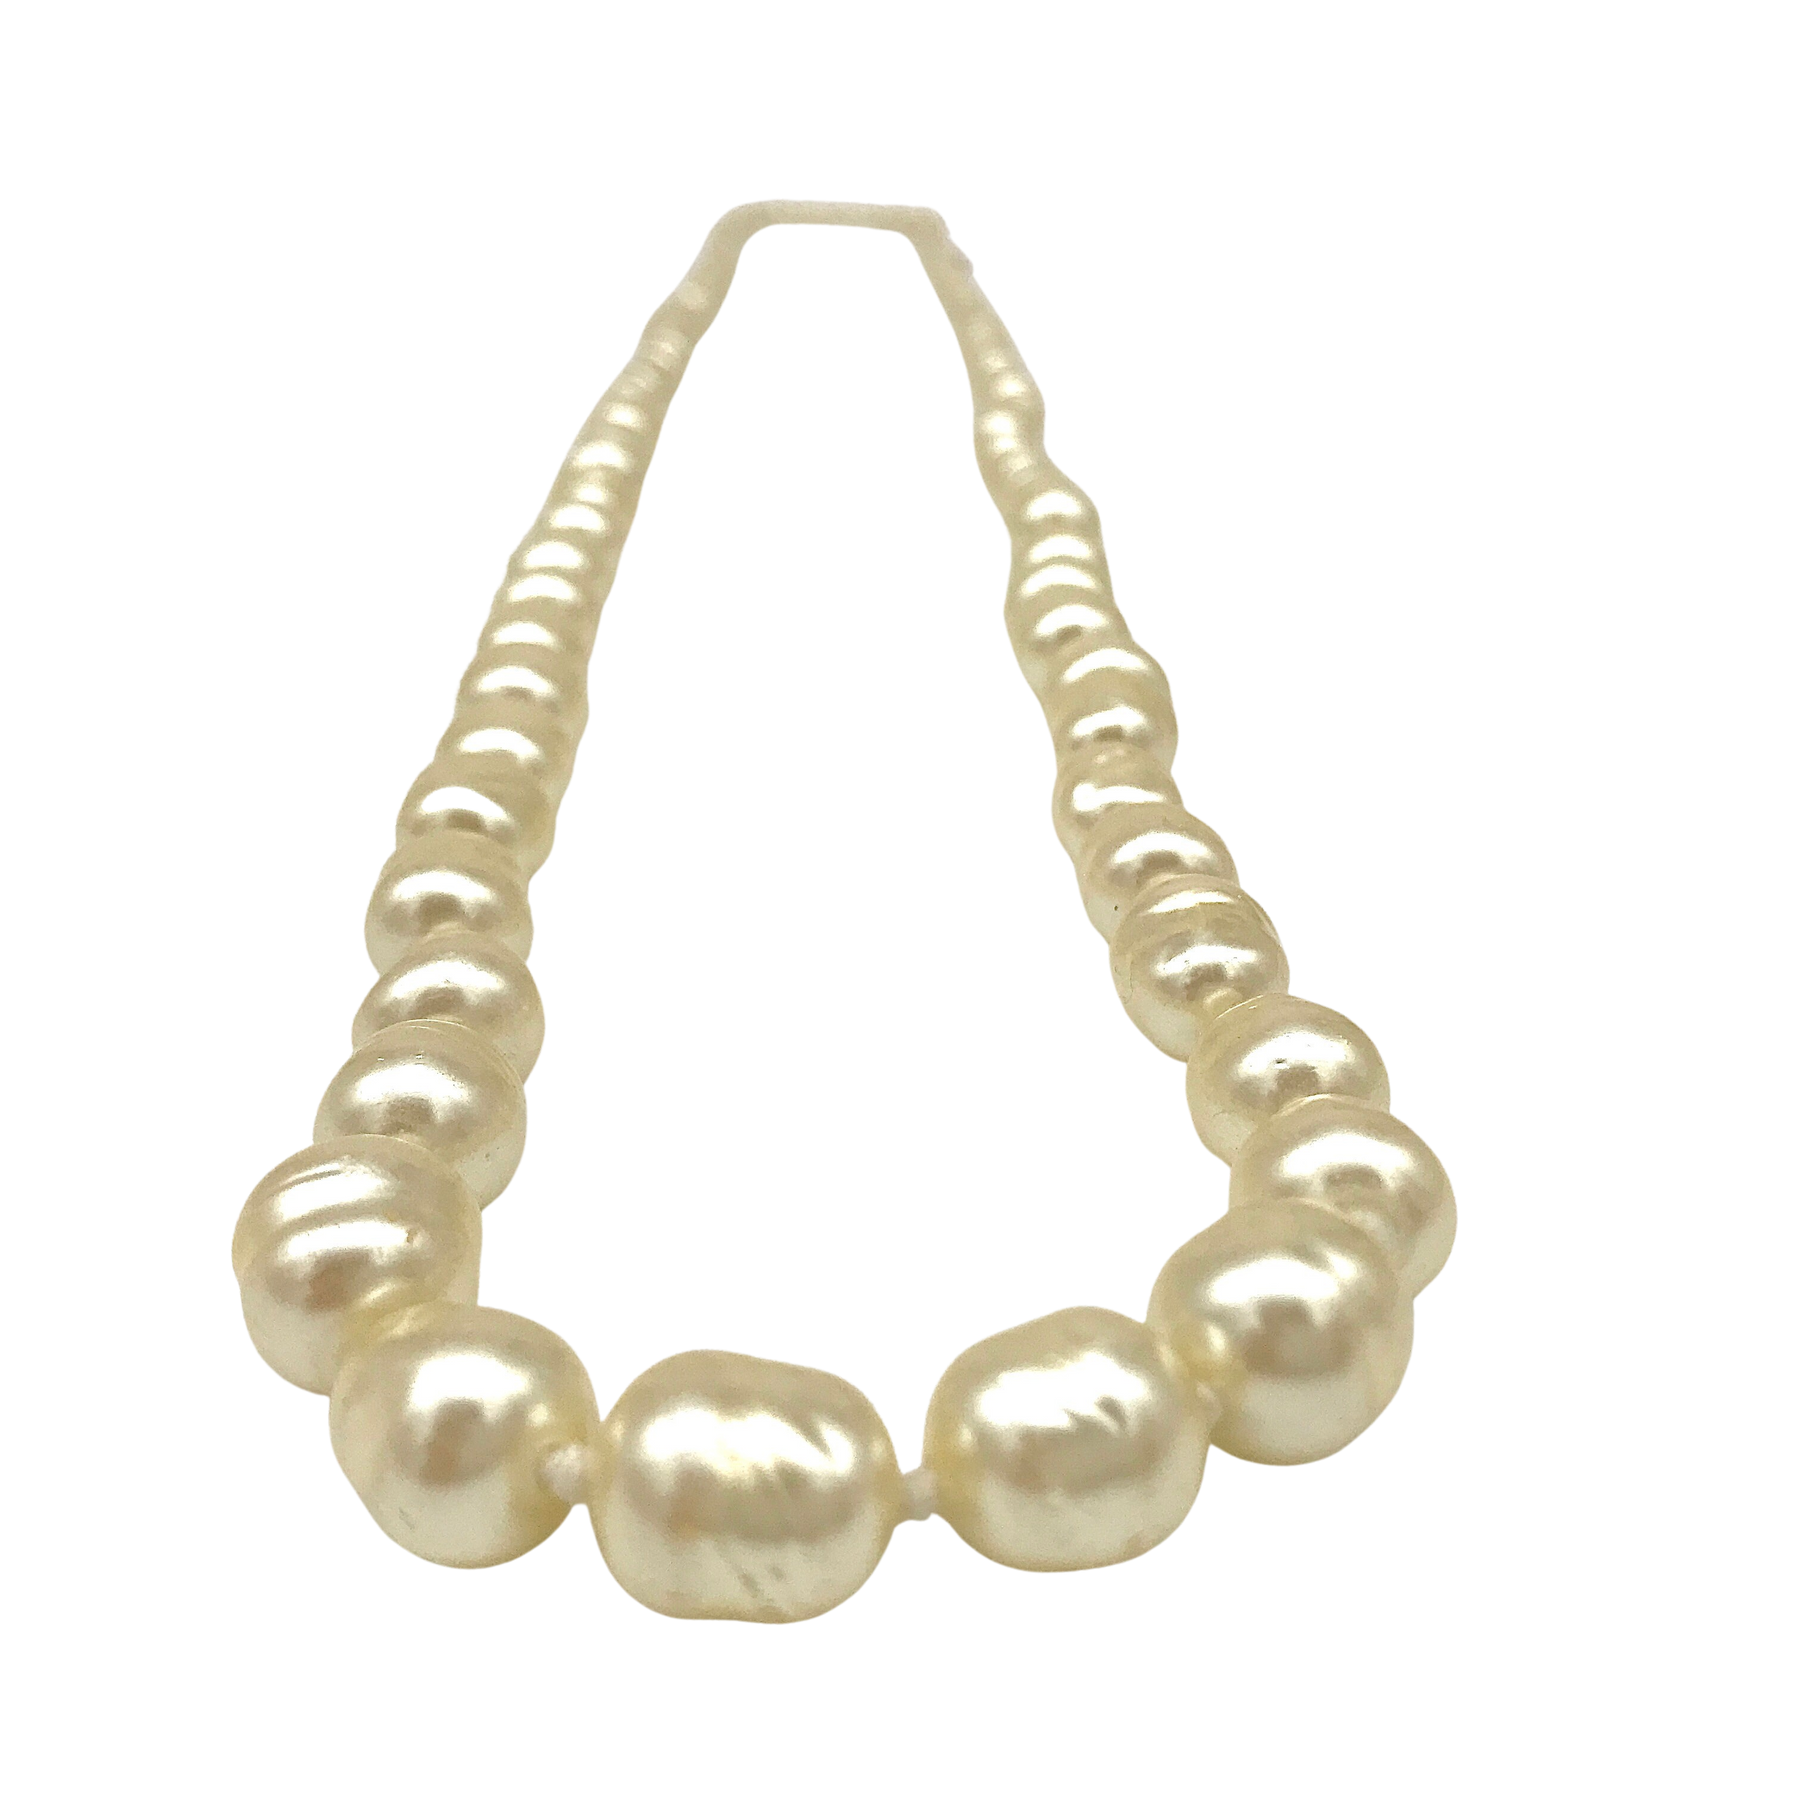 chanel pearl necklace older dupes｜TikTok Search